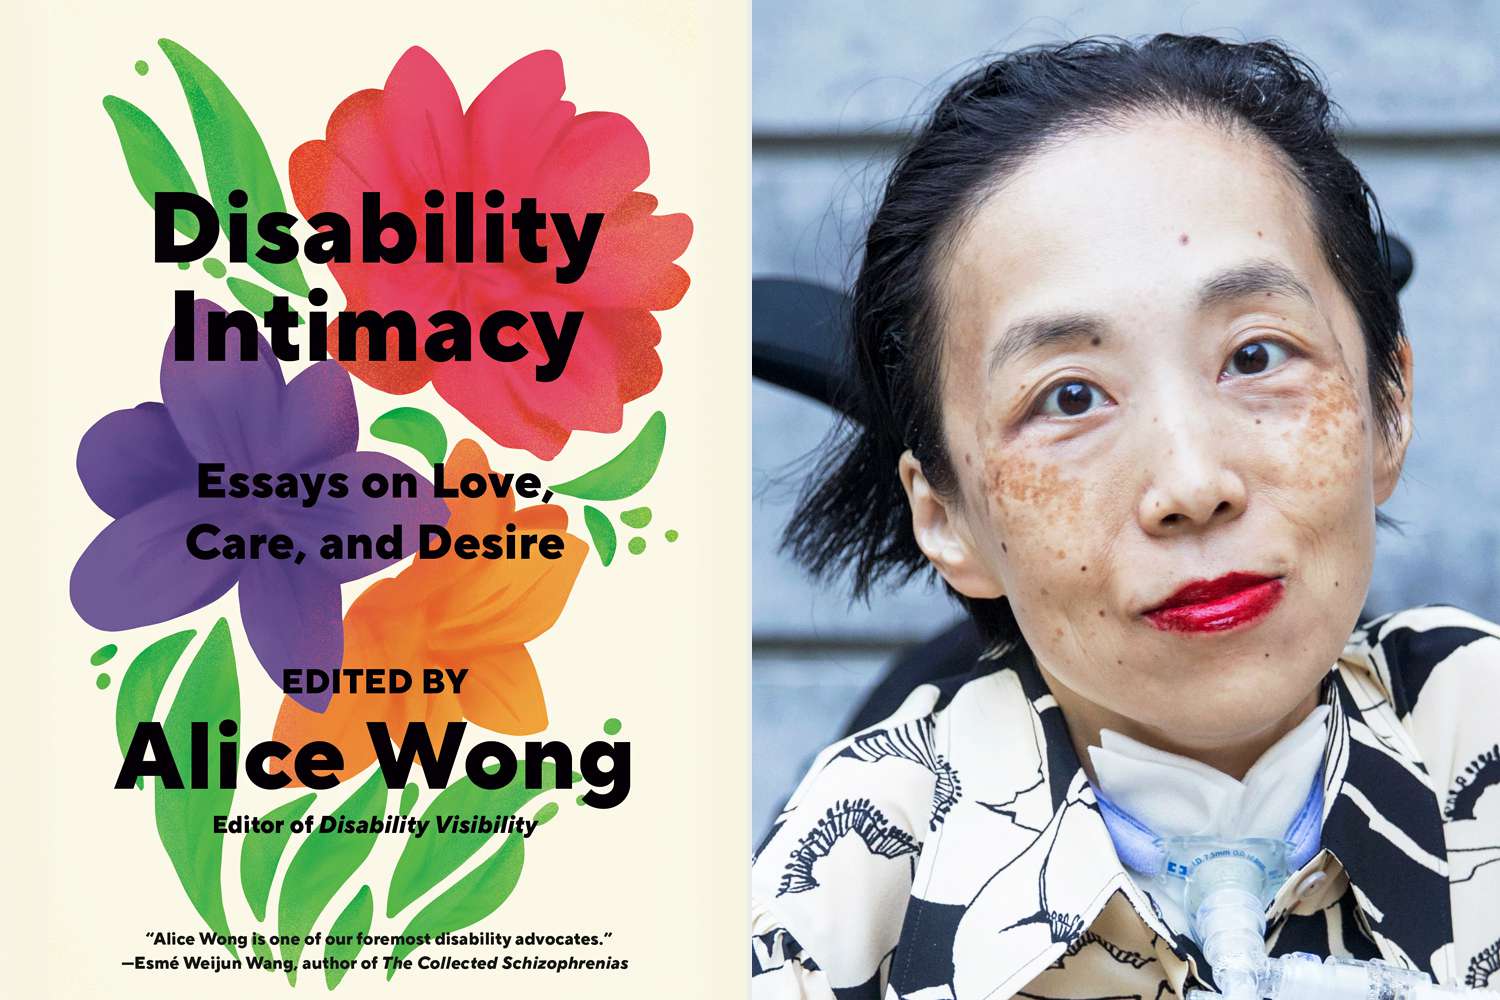 Disability Intimacy: Essays on Love, Care, and Desire edited by Alice Wong